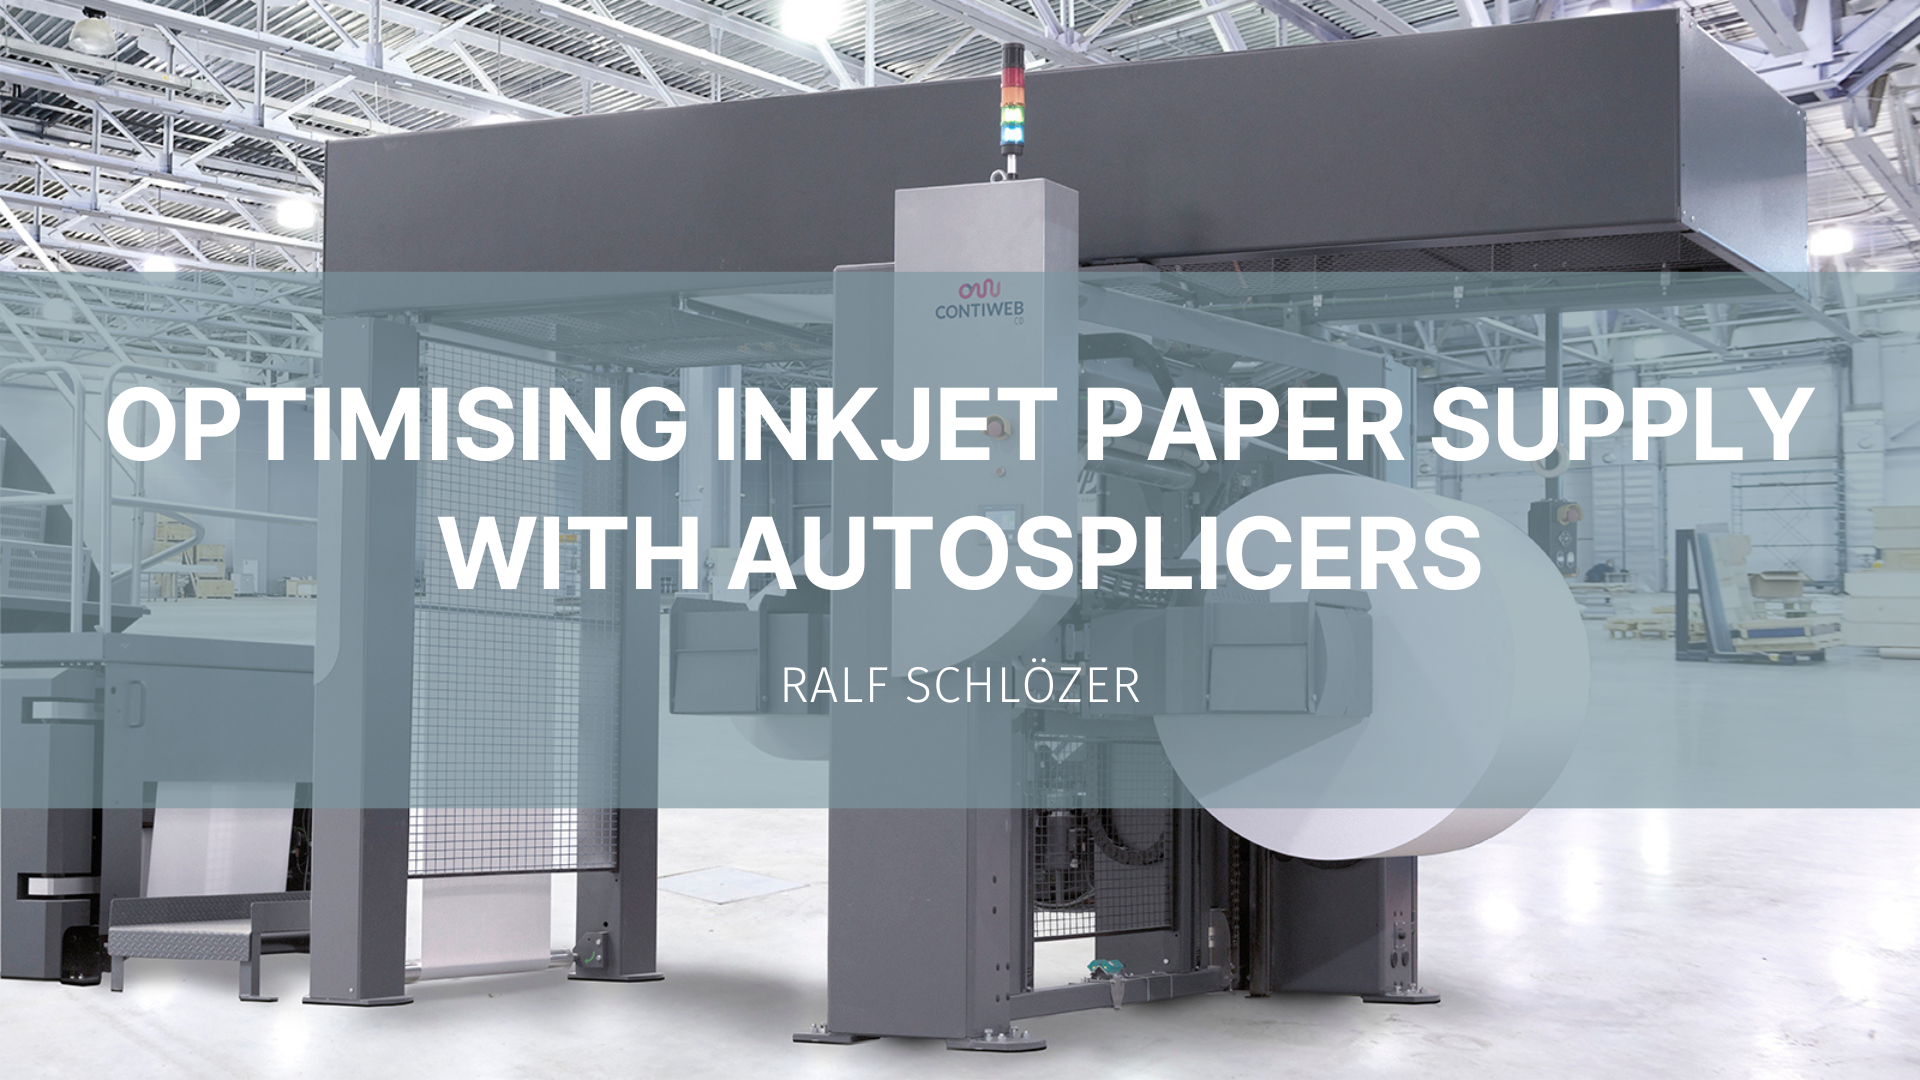 Featured image for “Optimising inkjet paper supply with autosplicers”